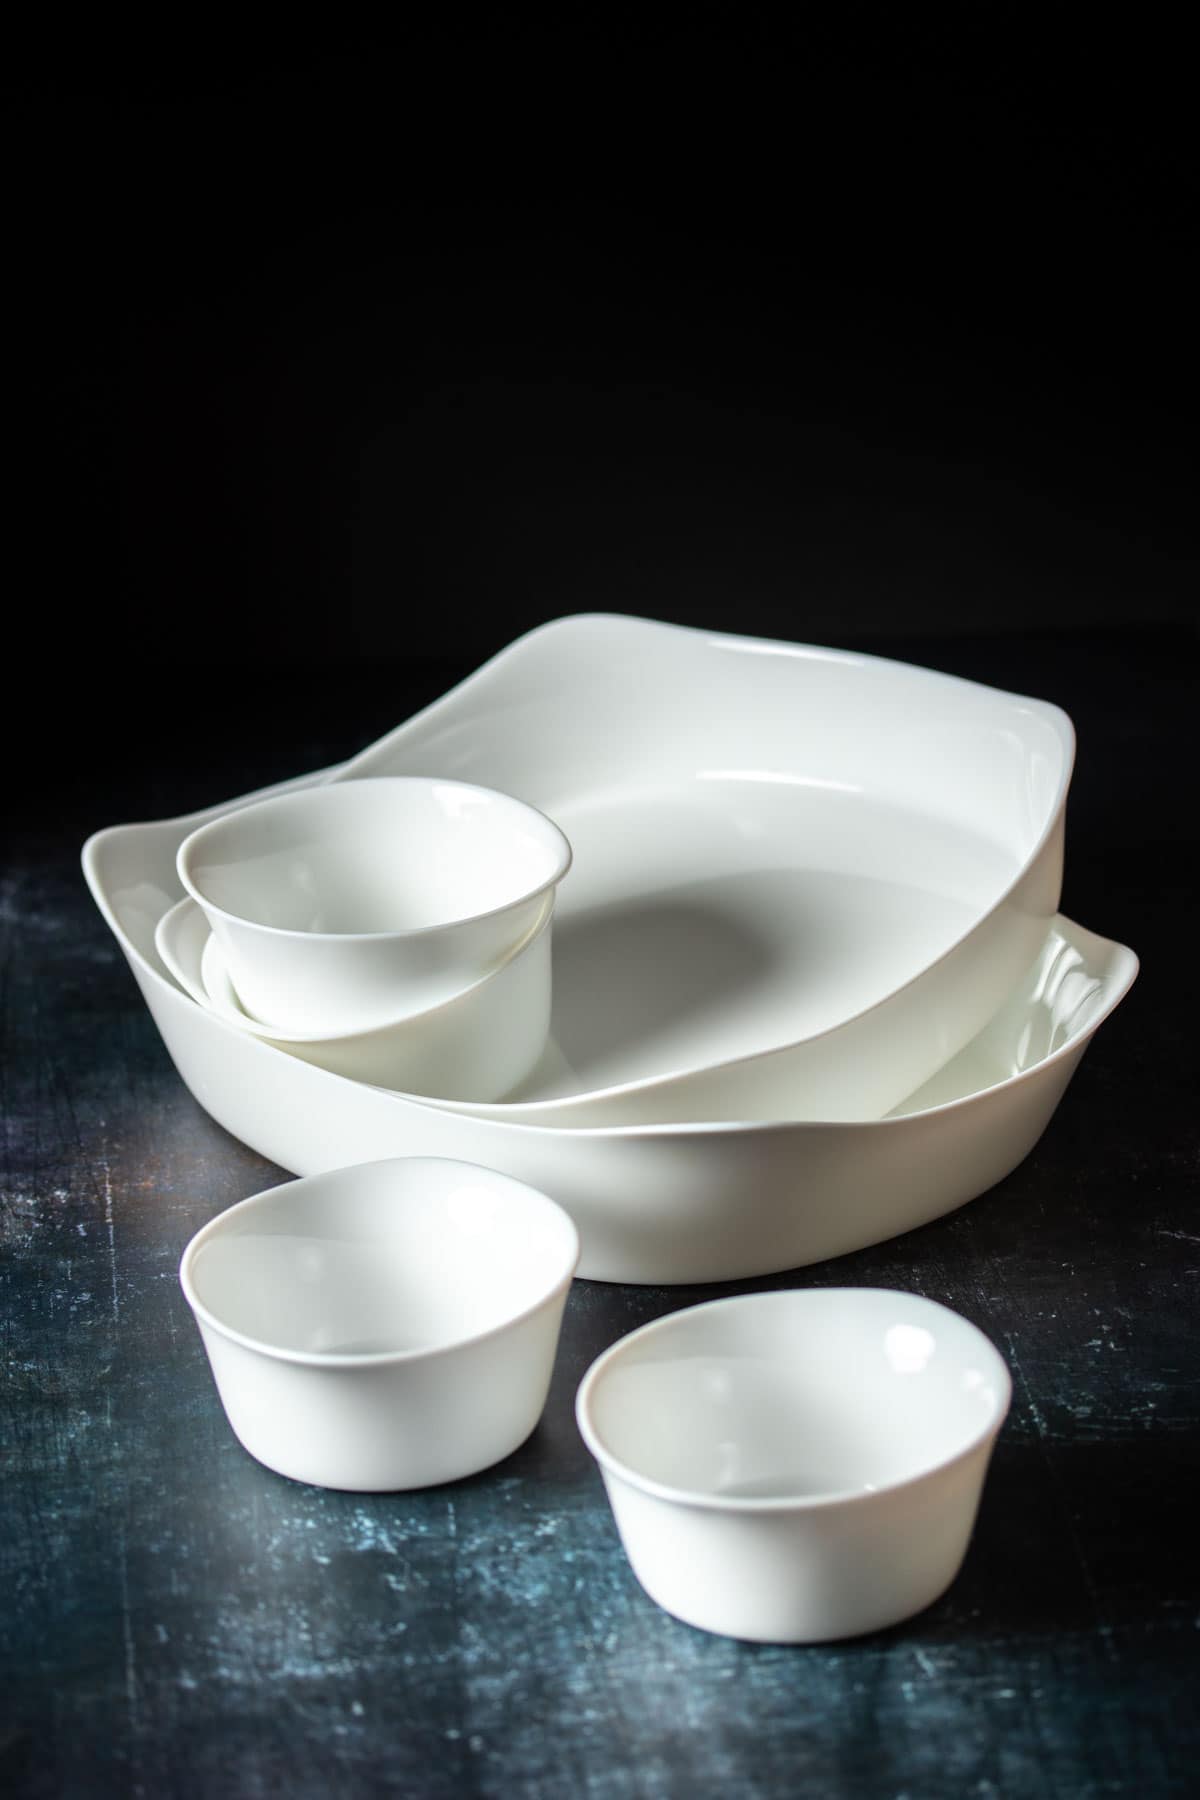 A stacked pile of white baking dishes in different sizes sitting on a dark surface.